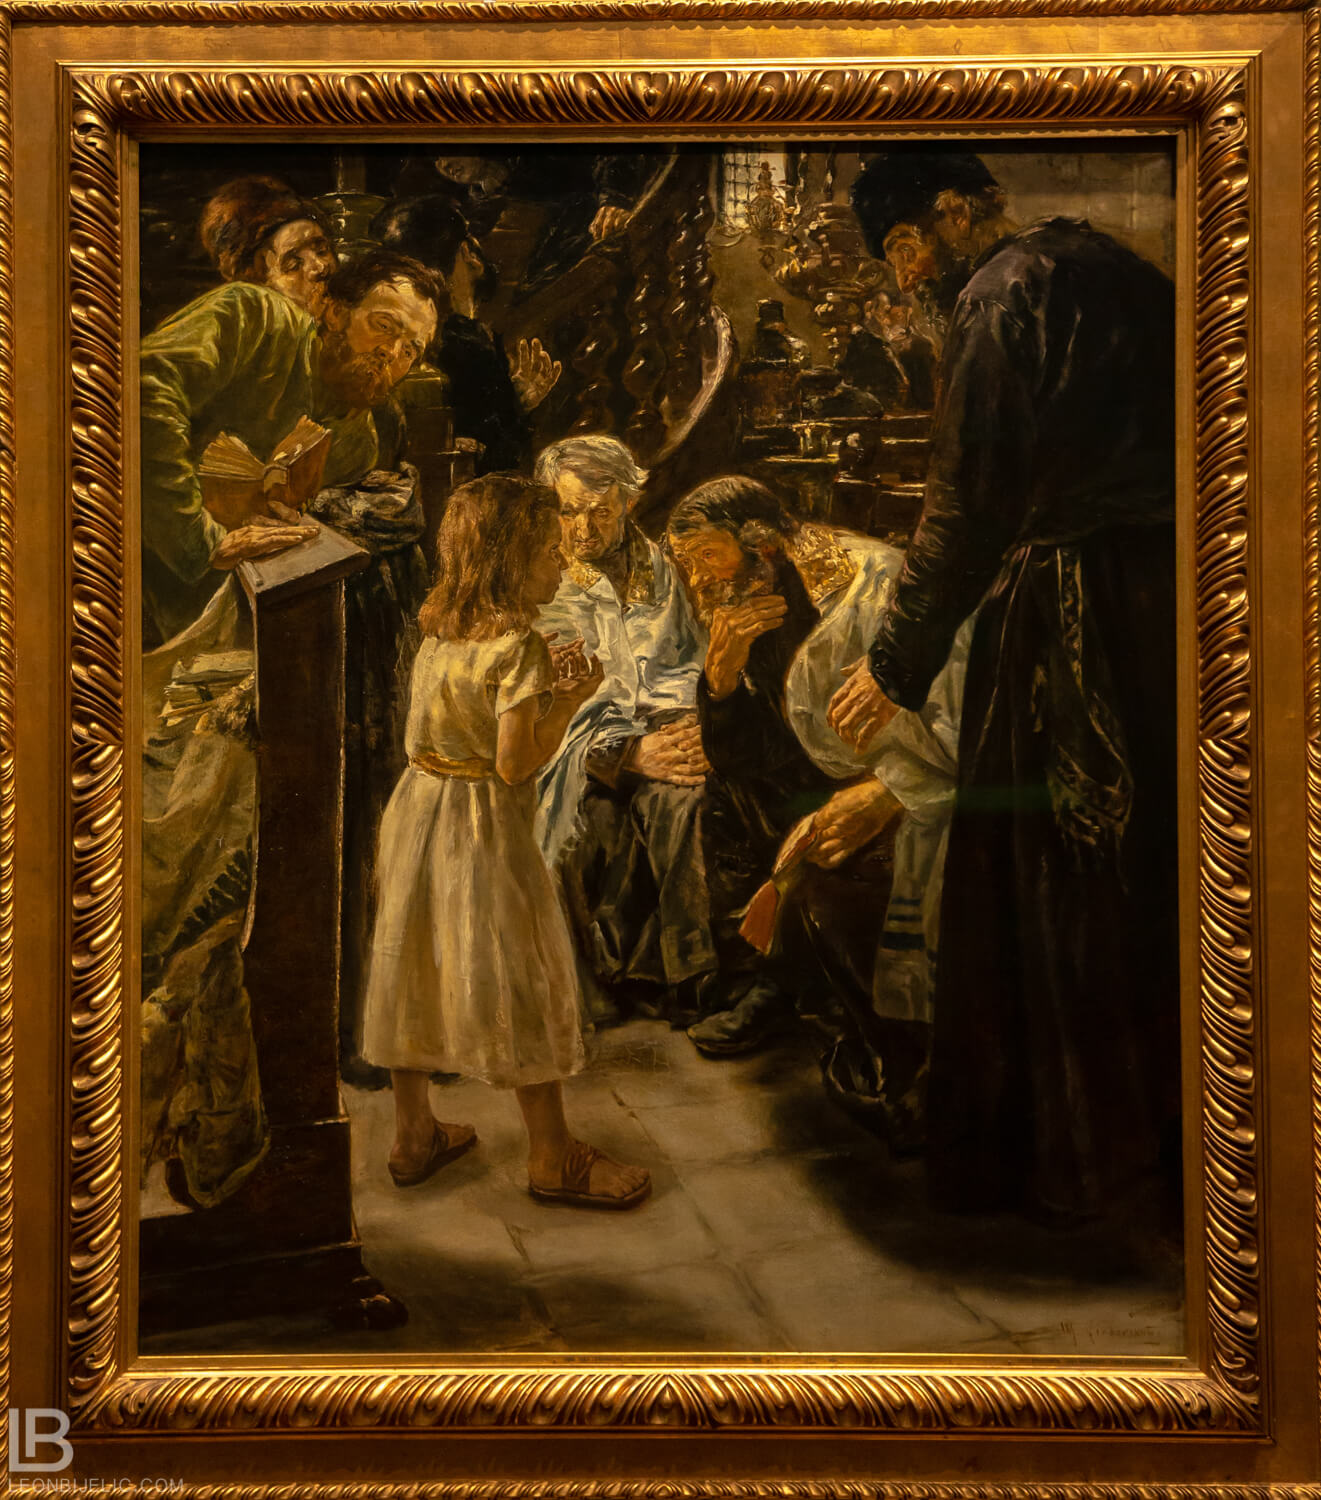 KUNSTHALLE MUSEUM - HAMBURG - PHOTOS BY LEON BIJELIC - Germany - Kunst - Art - Painting - Max Liebermann - The Twelve-Year-Old Jesus in the Temple - 1879 - Oil on canvas